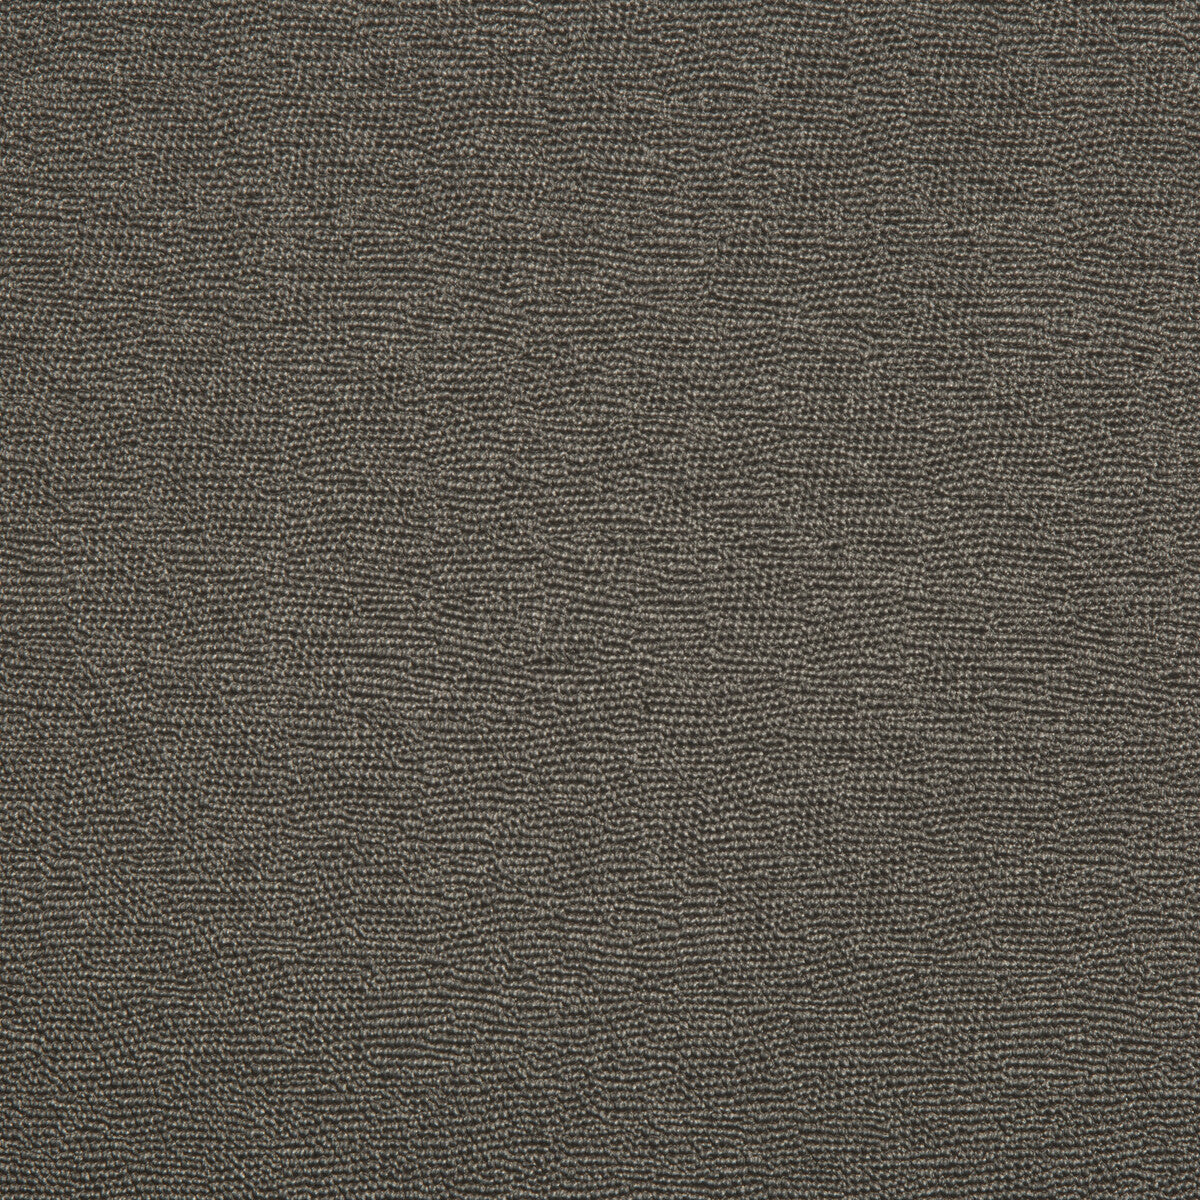 Spartan fabric in onyx color - pattern SPARTAN.21.0 - by Kravet Contract in the Faux Leather Extreme Performance collection